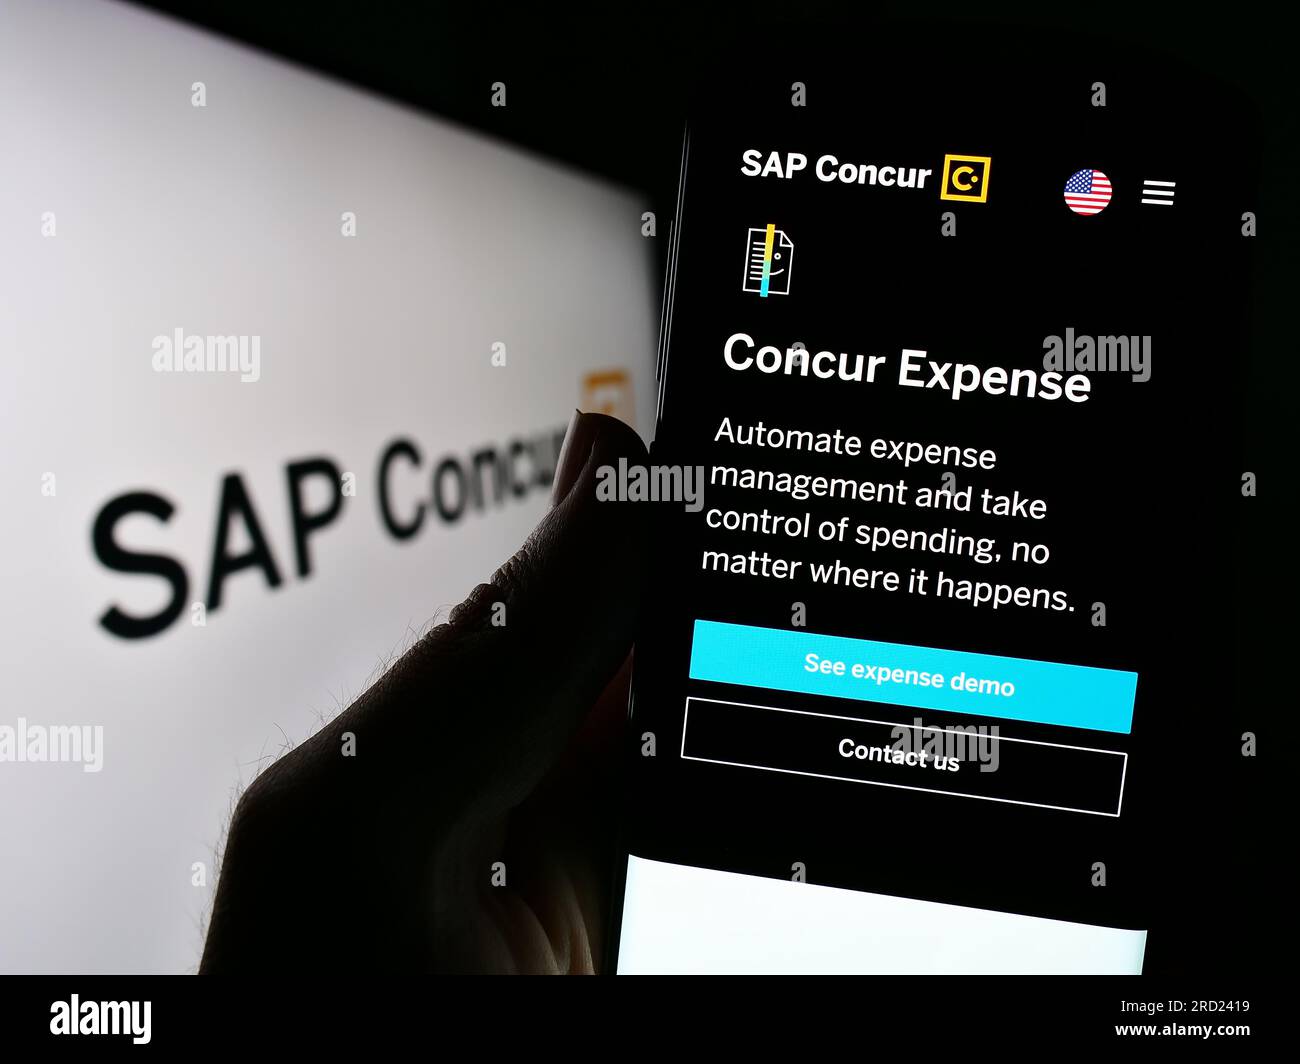 Person holding cellphone with website of expense management software SAP Concur on screen in front of logo. Focus on center of phone display. Stock Photo